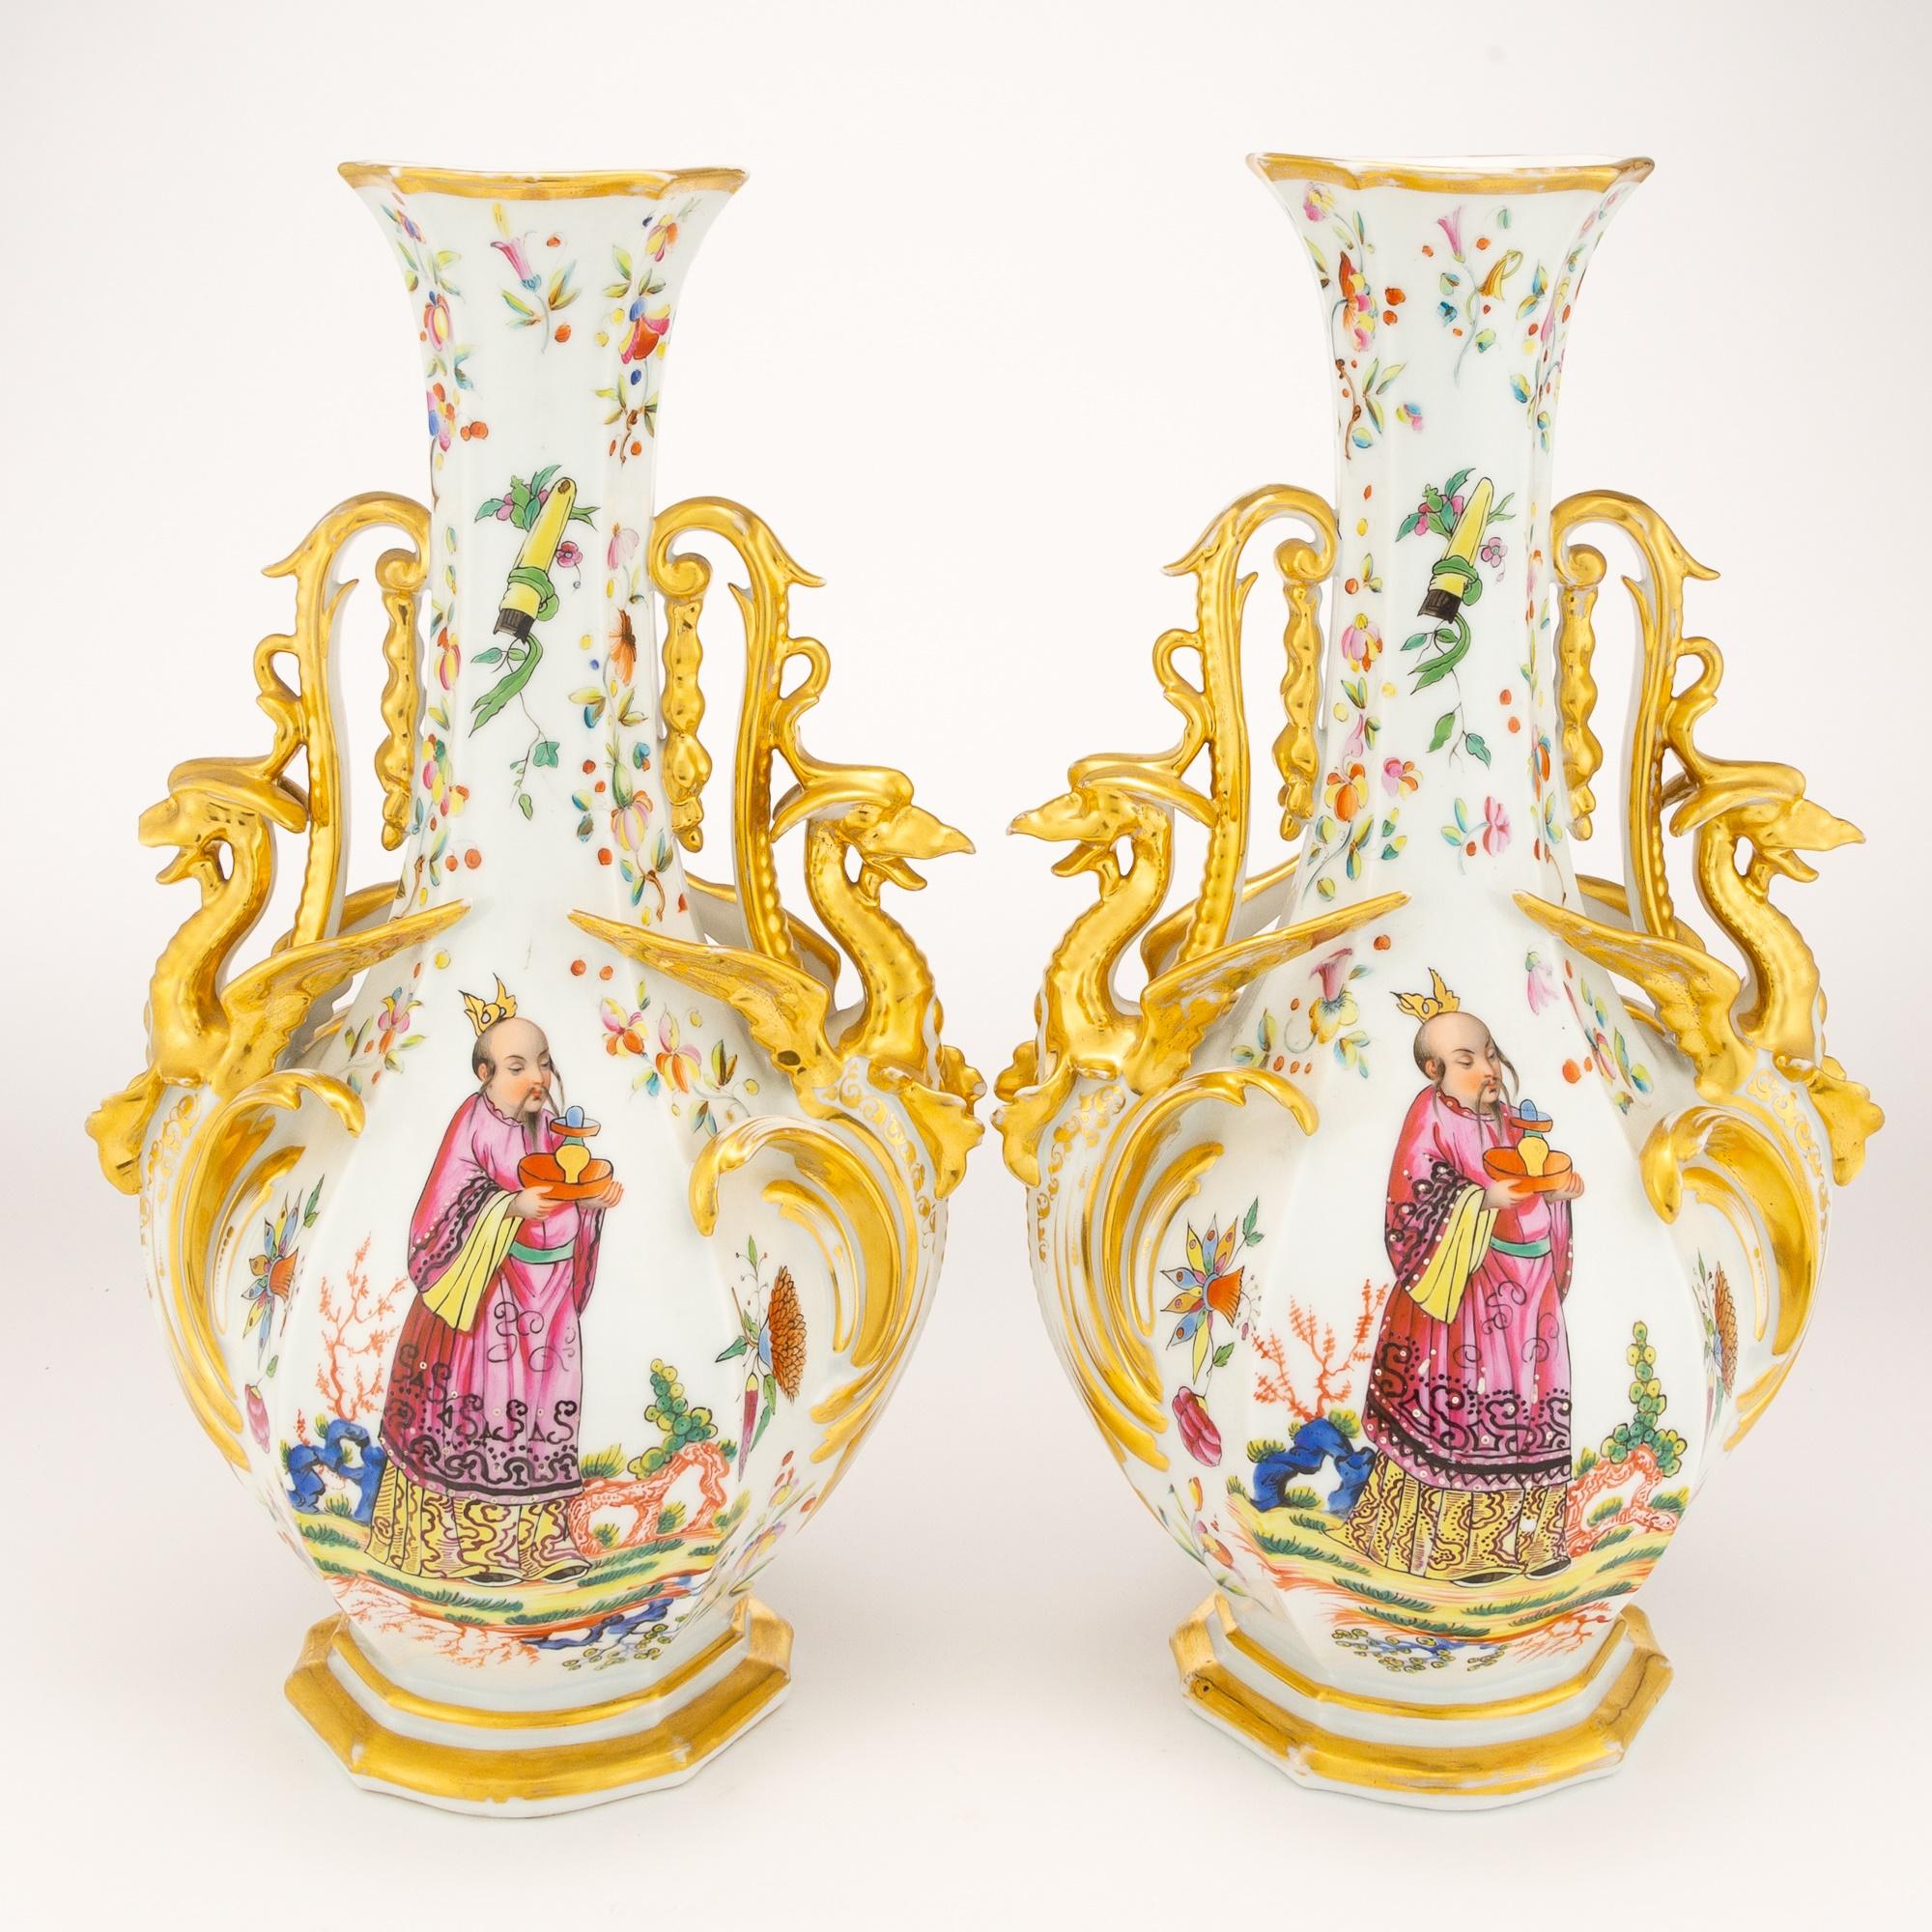 Enhance your space in the timeless elegance of the late 19th Century Pair of Gilt and Polychrome Porcelain Vases. Crafted with meticulous attention to detail, each vase boasts a bottle form with beautifully paneled sides and dragon-form handles,